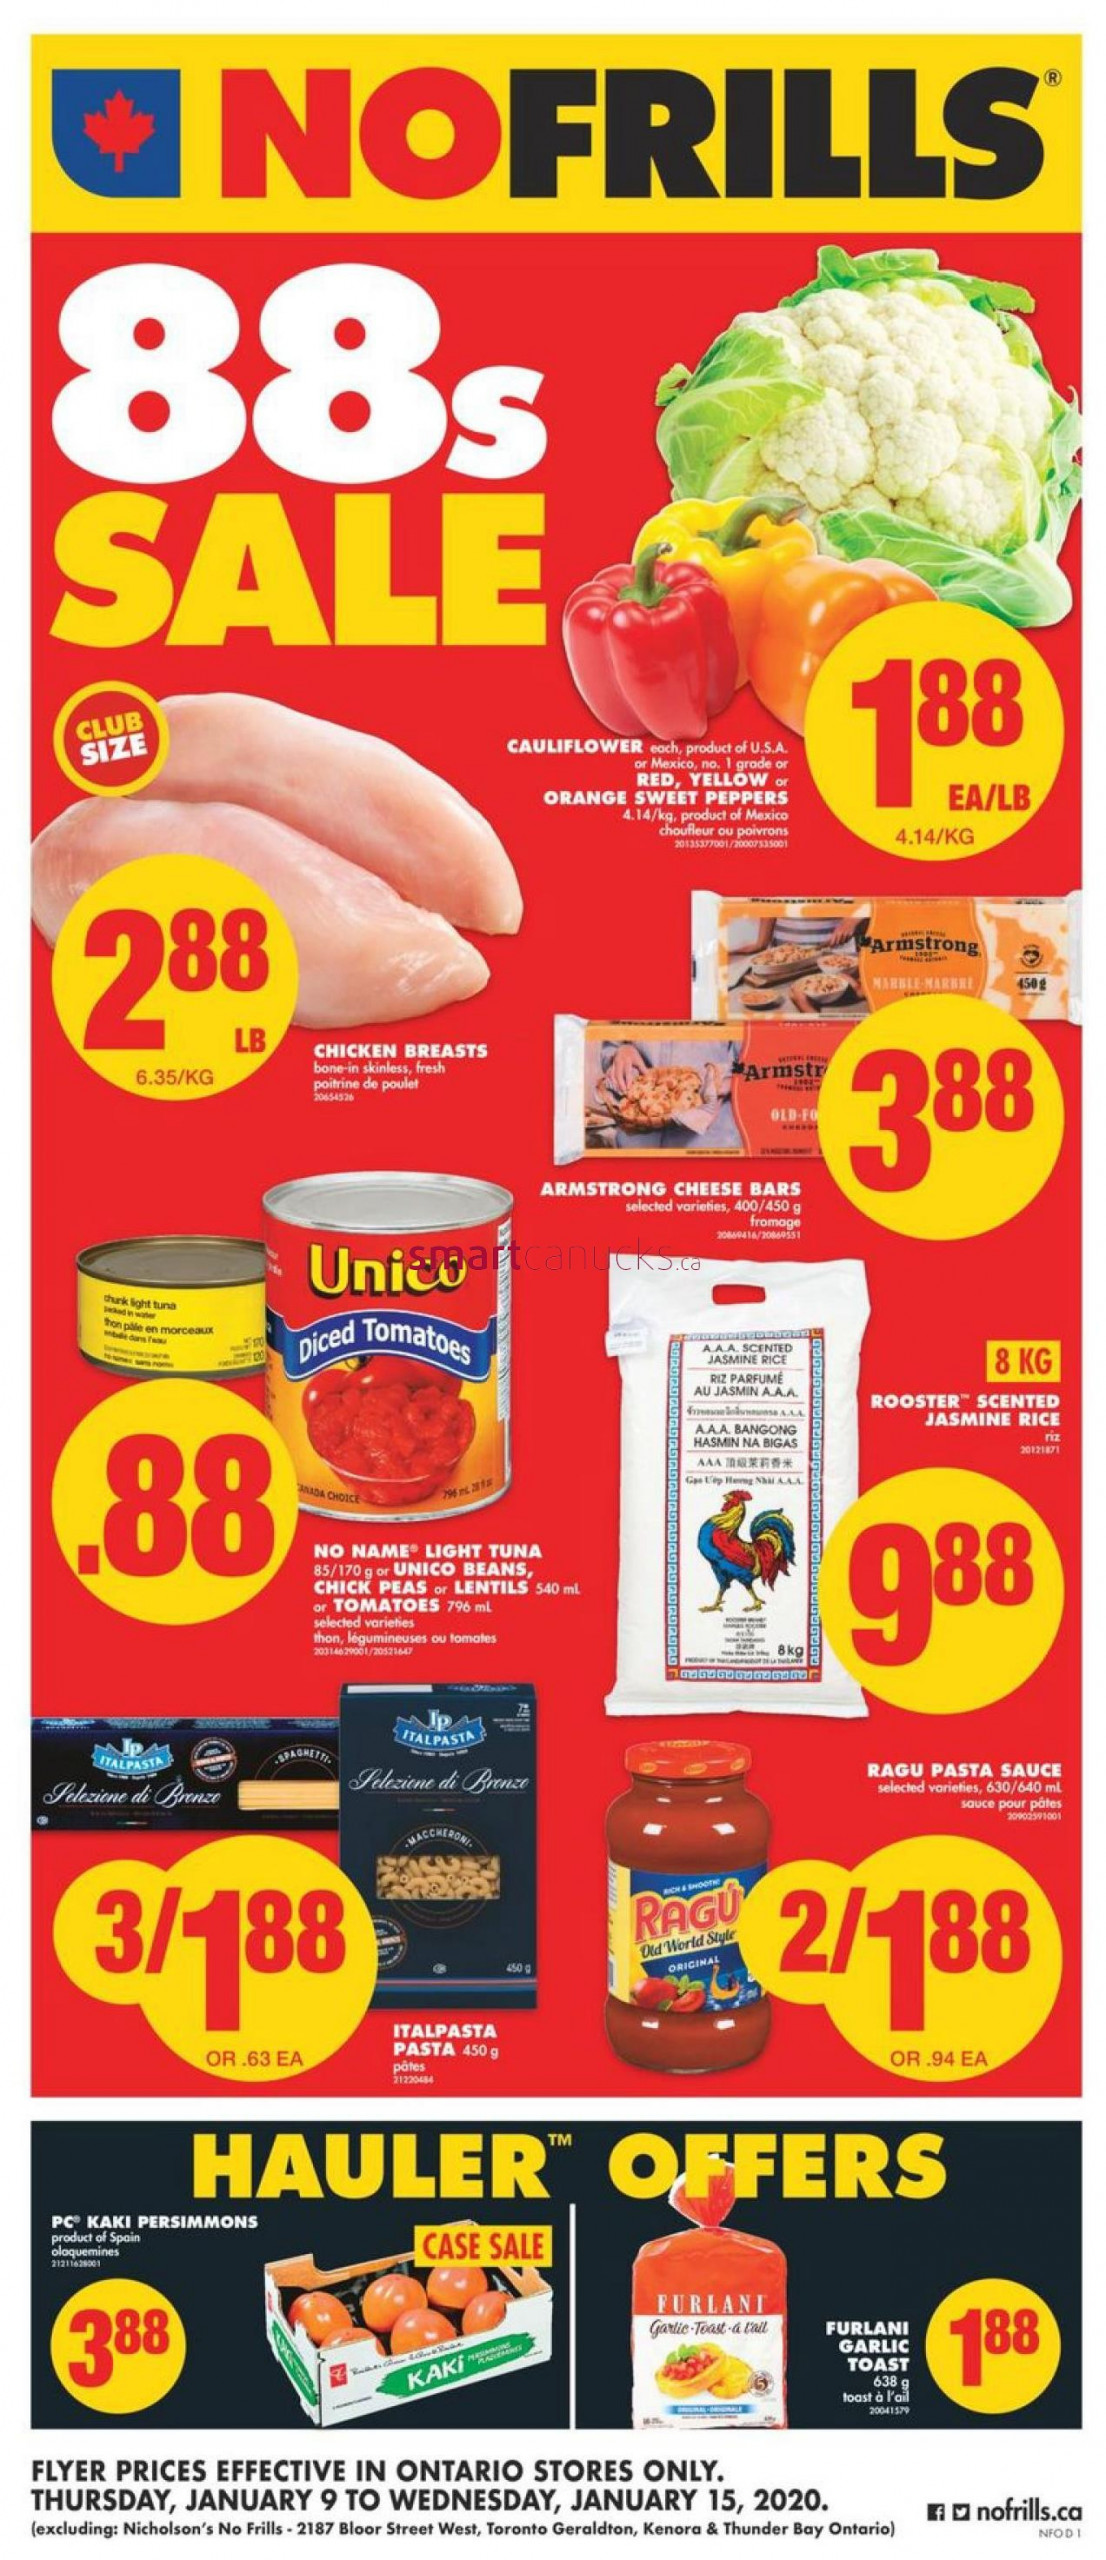 No Frills Ontario Flyer Deals January 9th To 15th 